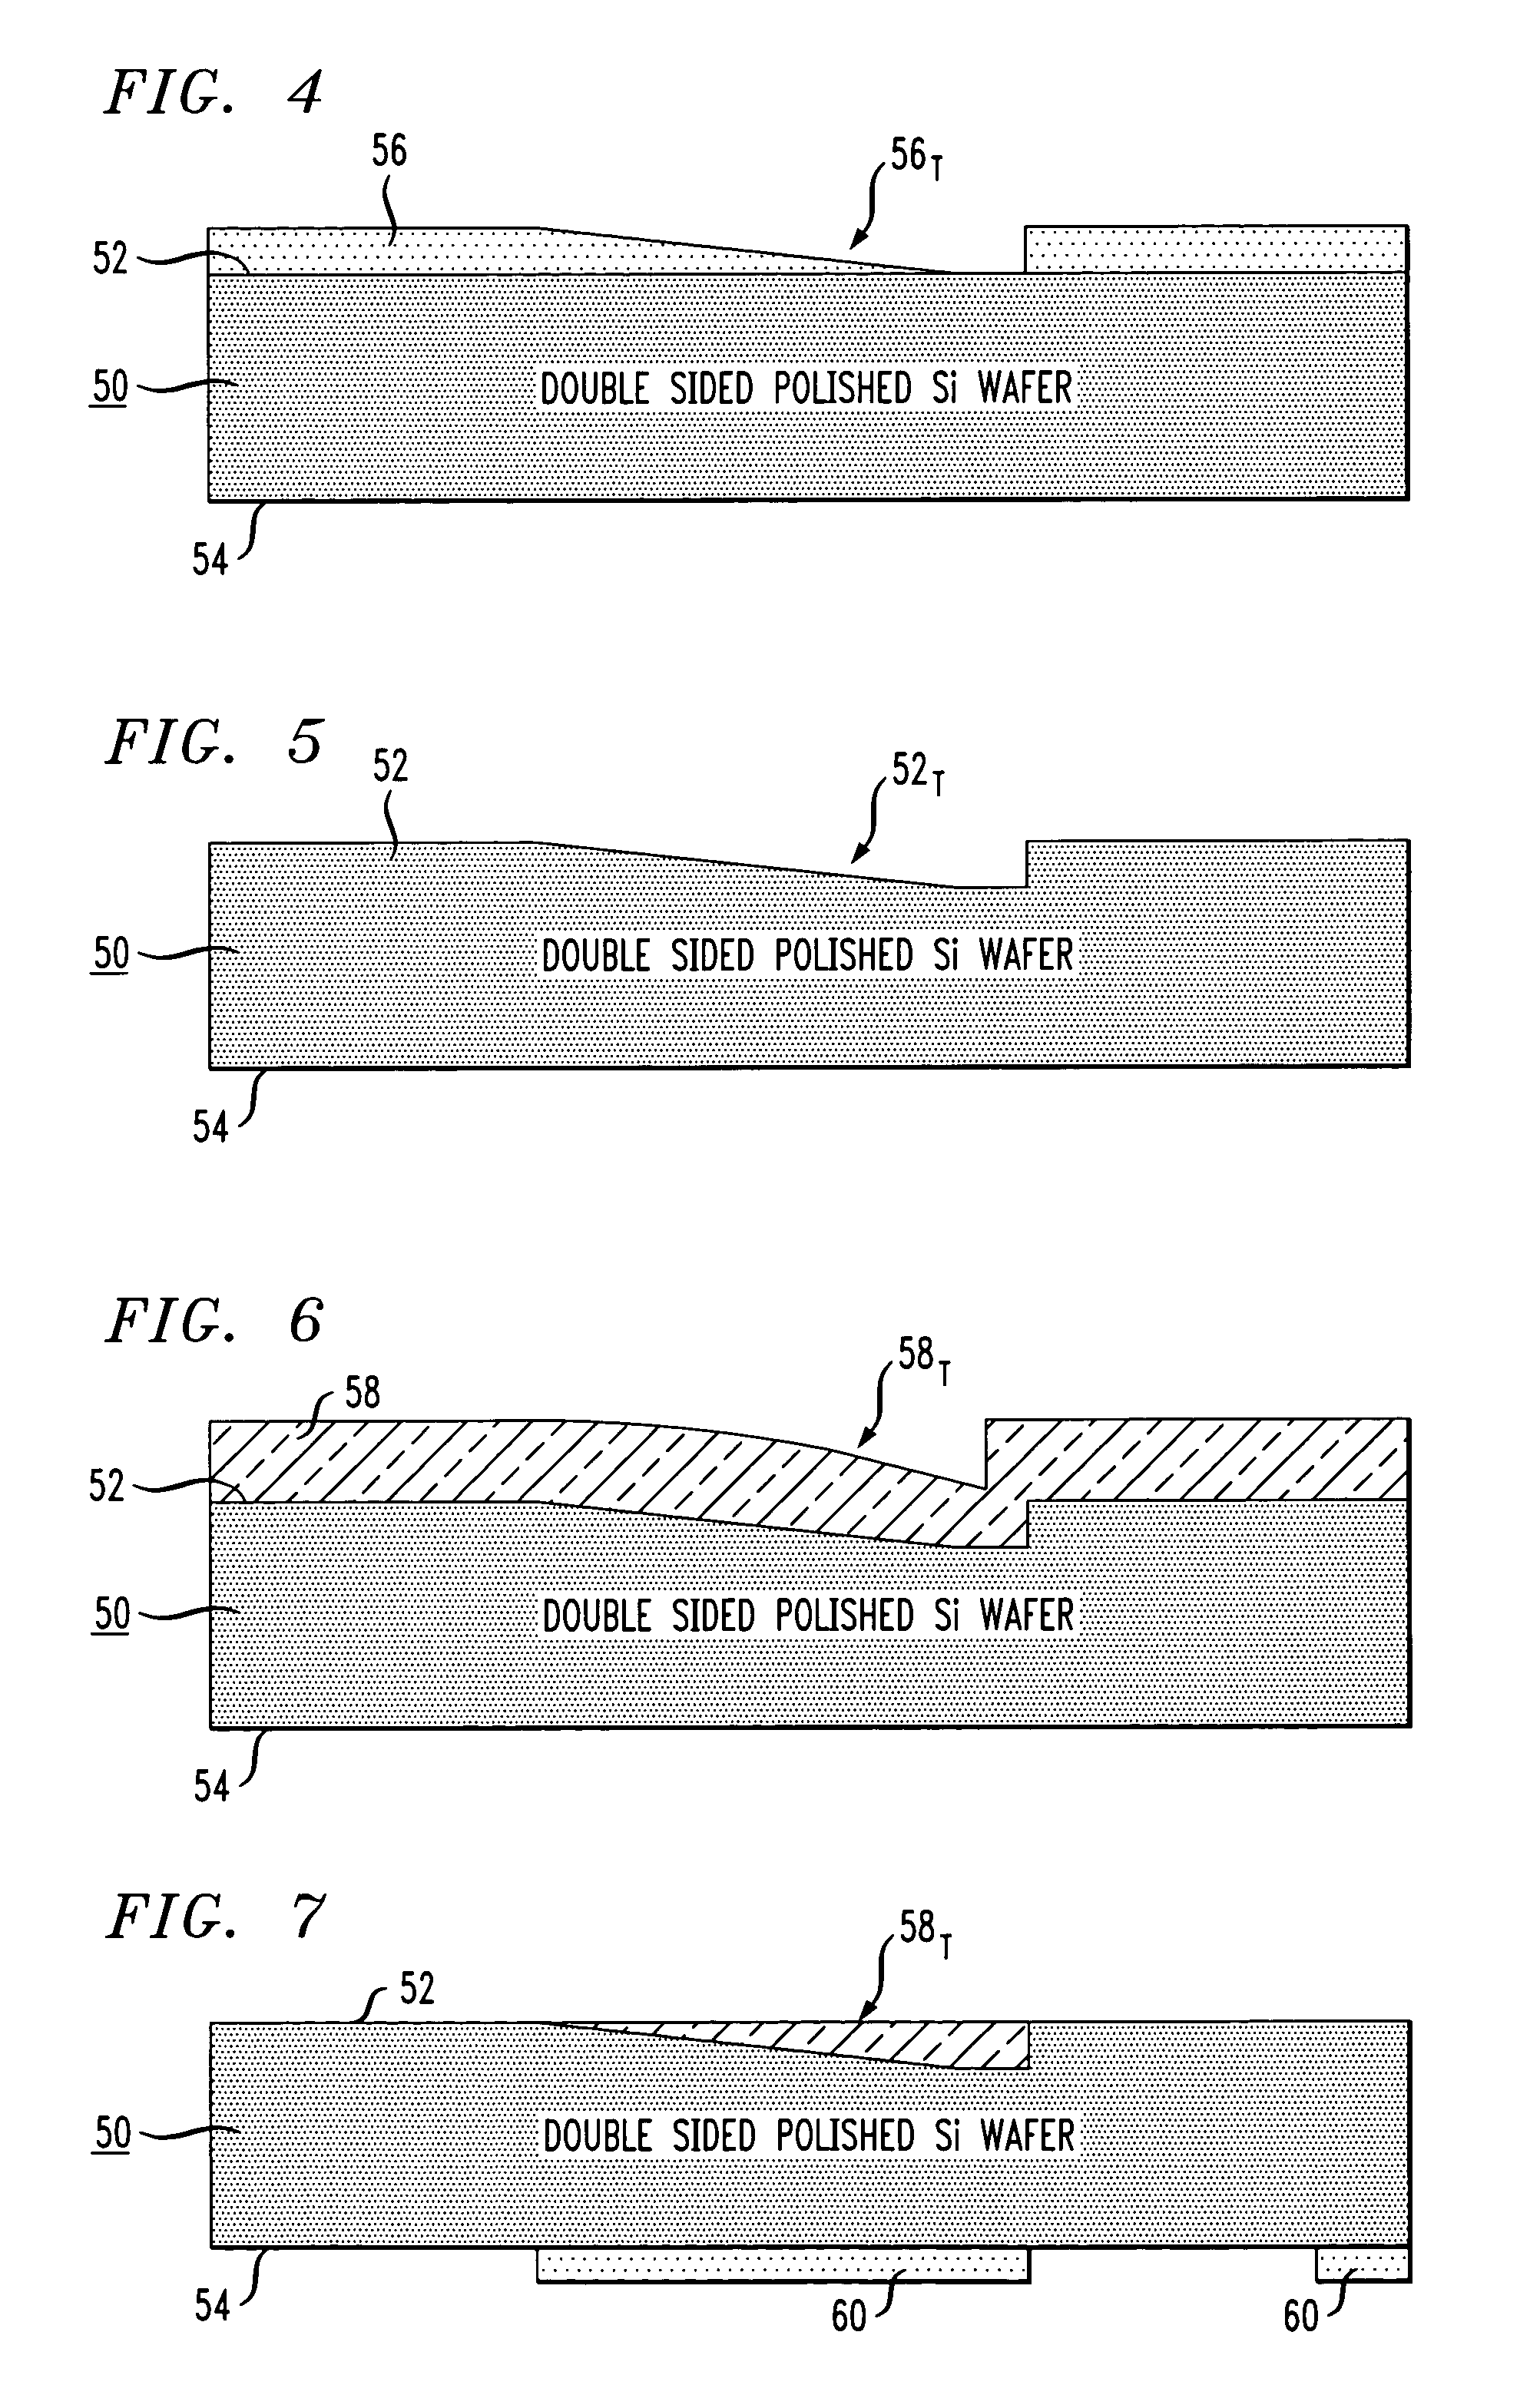 Tapered structure for providing coupling between external optical device and planar optical waveguide and method of forming the same